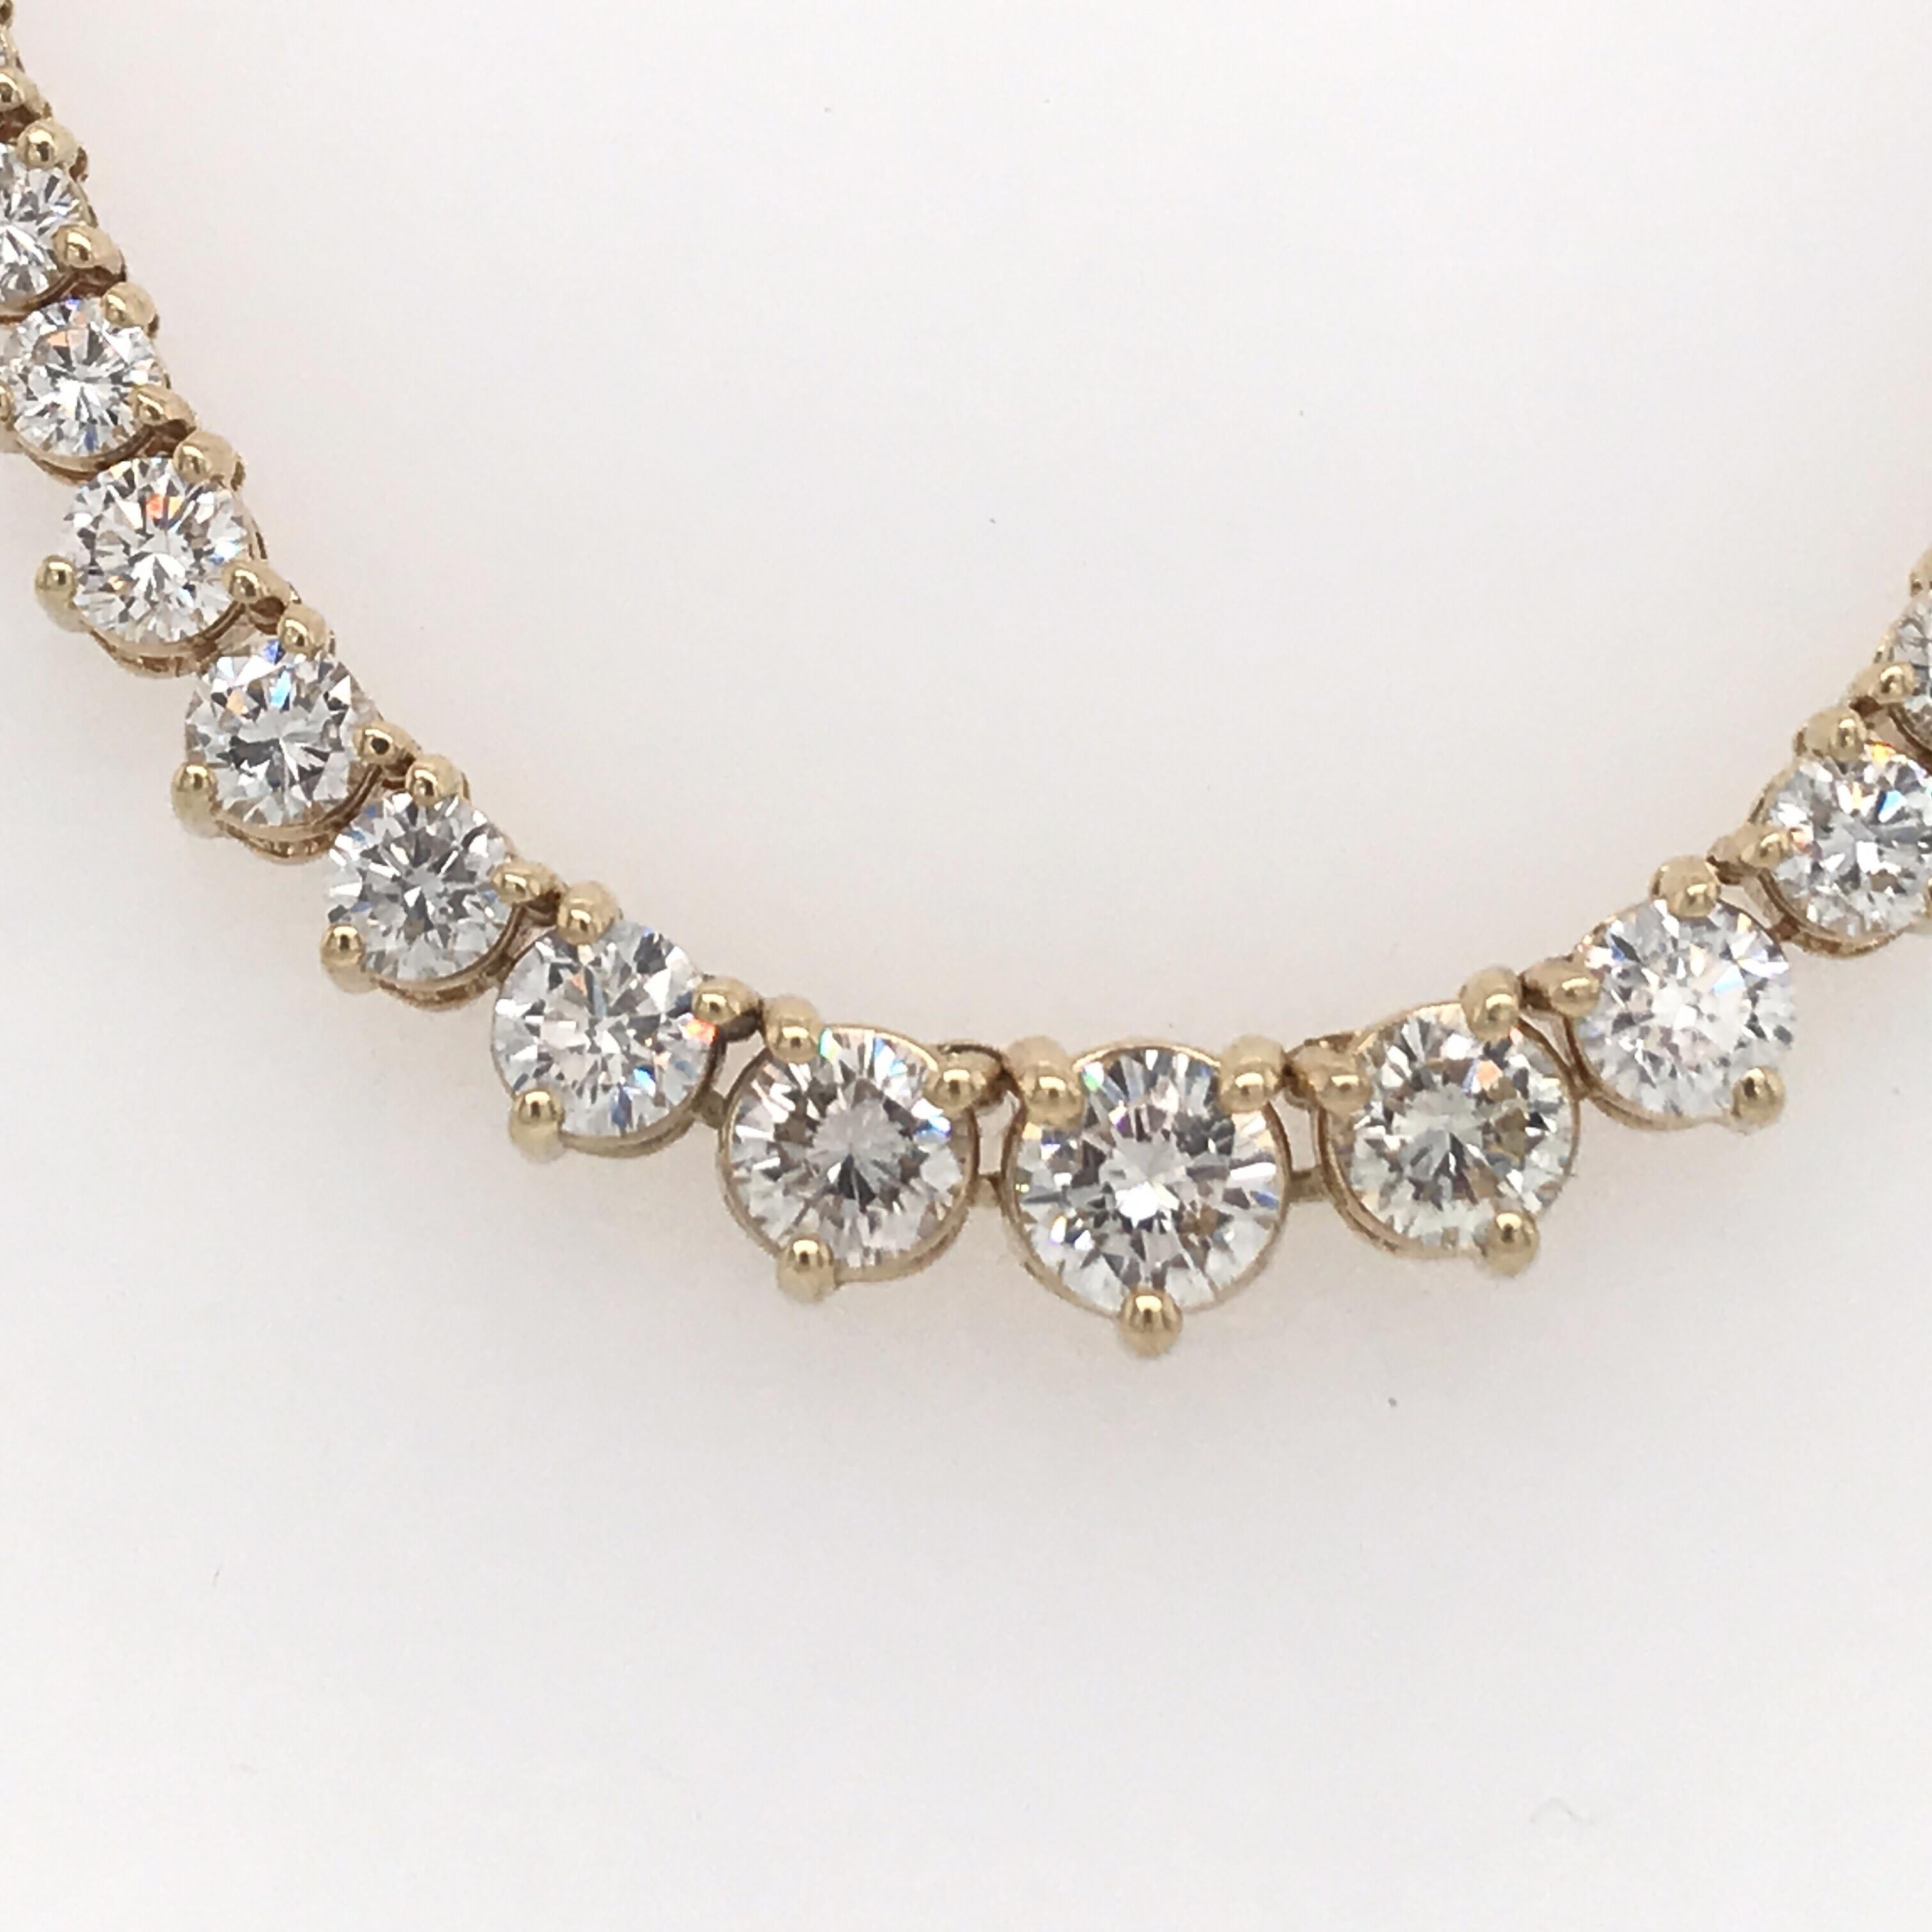 Graduated diamond riviere necklace featuring 161 round brilliants weighing 8 carats in 14k yellow gold.
Color G-H
Clarity SI

Can custom make any size.